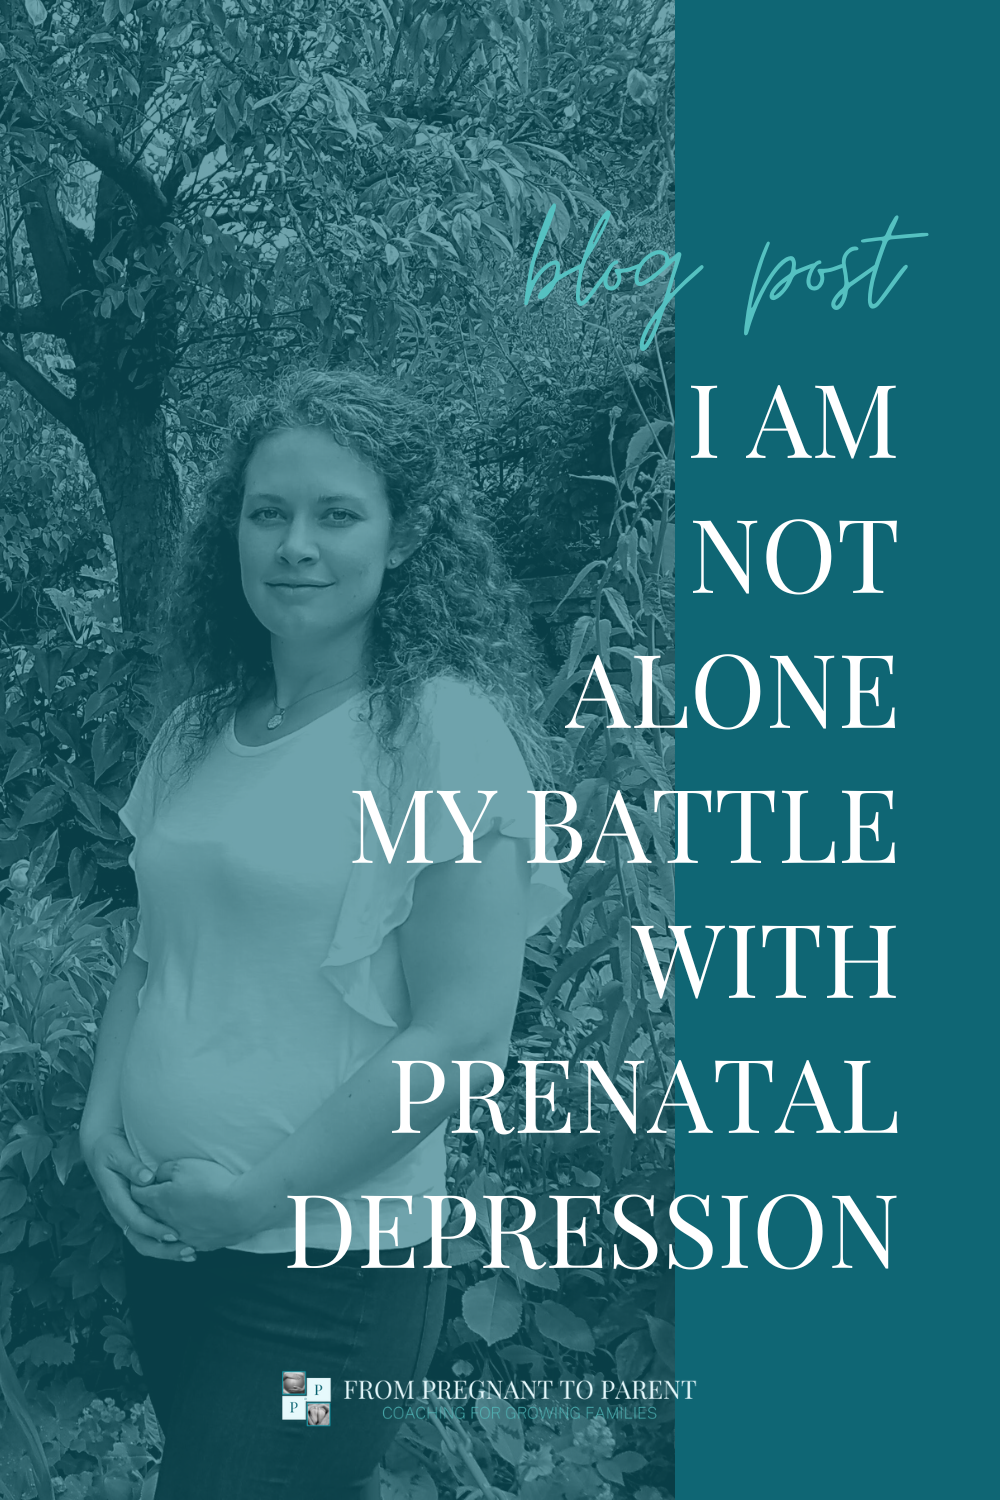 My Battle with Prenatal Depression. You are not alone.